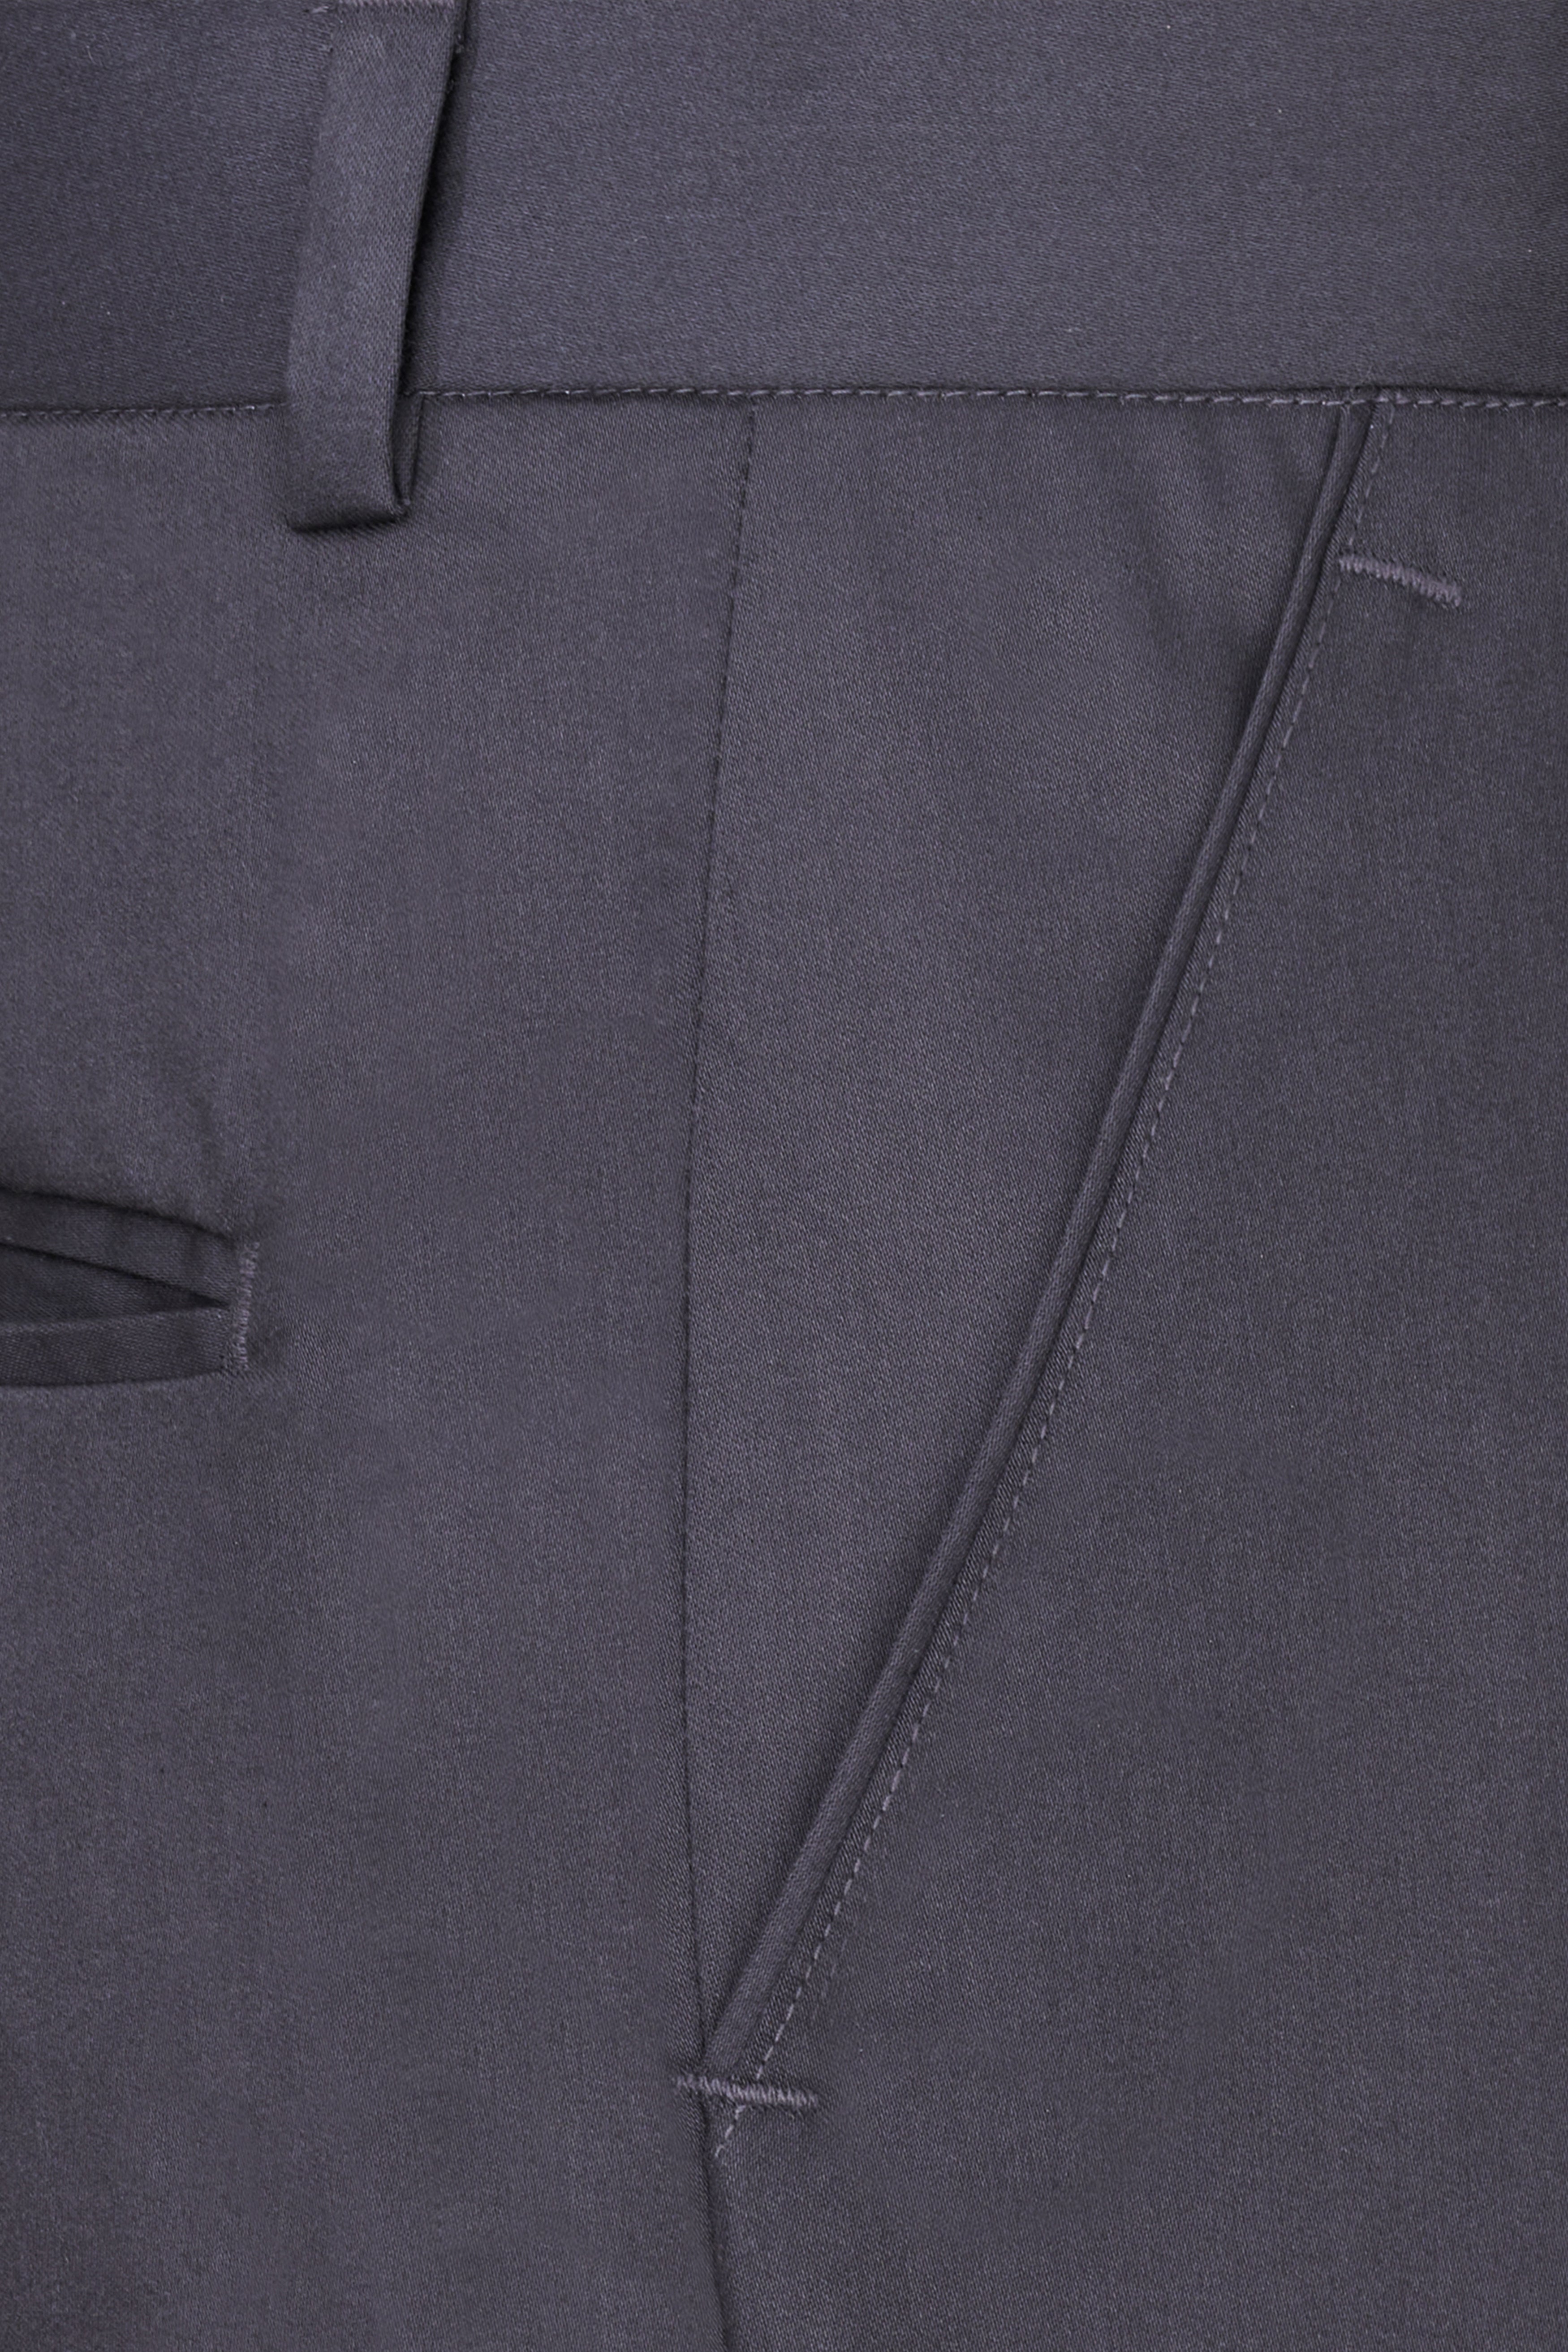 Porpoise Grey Subtle Sheen Wool Blend Double Breasted Suit